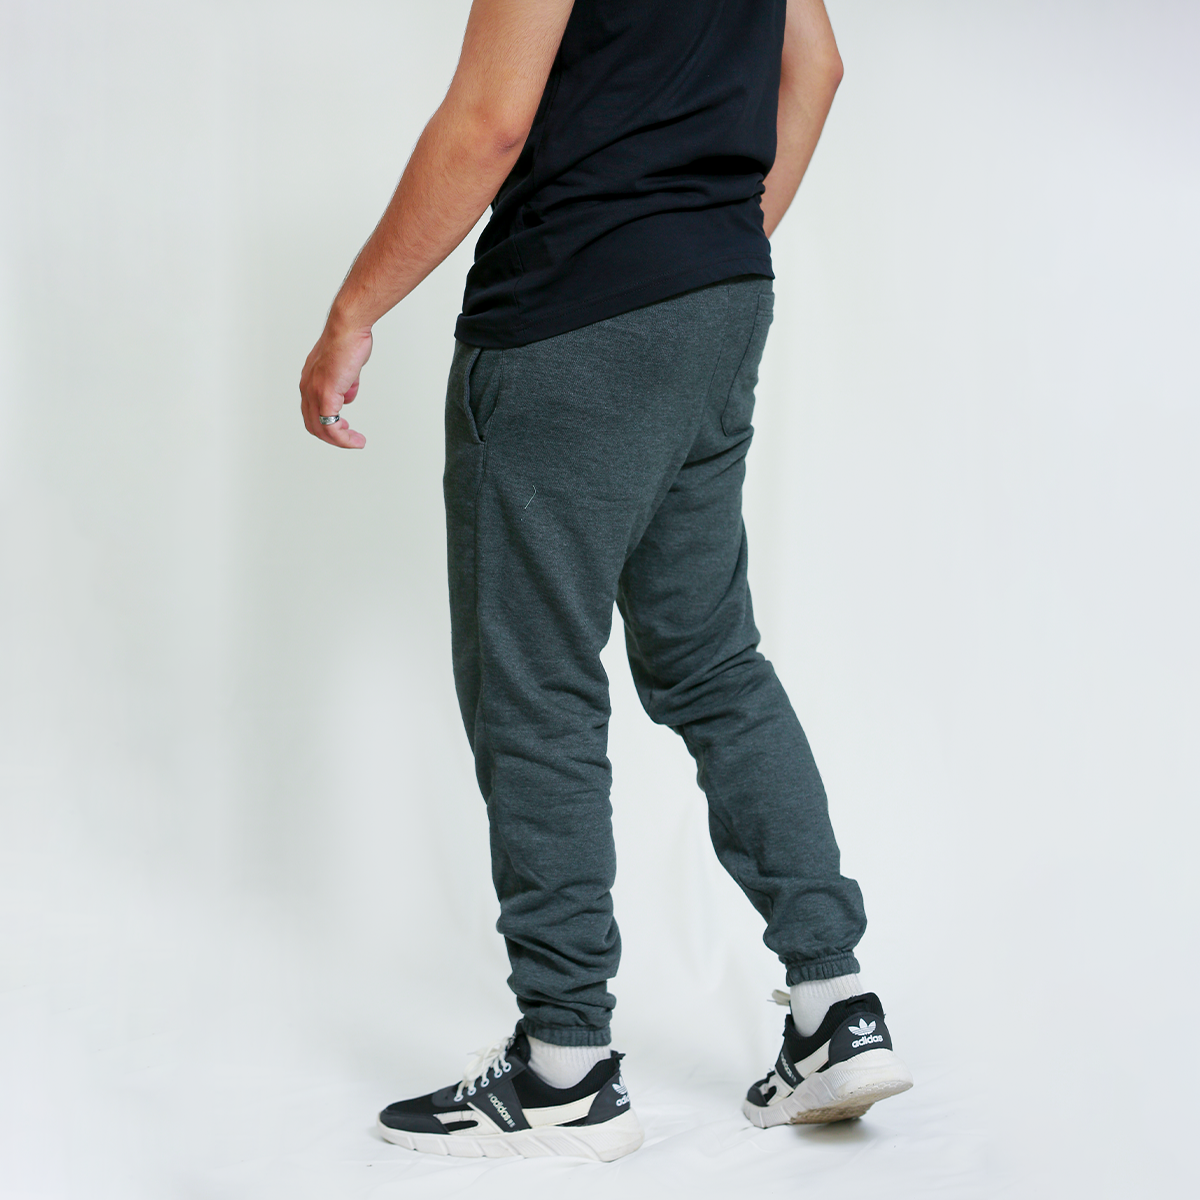 Charcoal Grey Unisex Sweatpants - French Terry (Summer-Friendly)